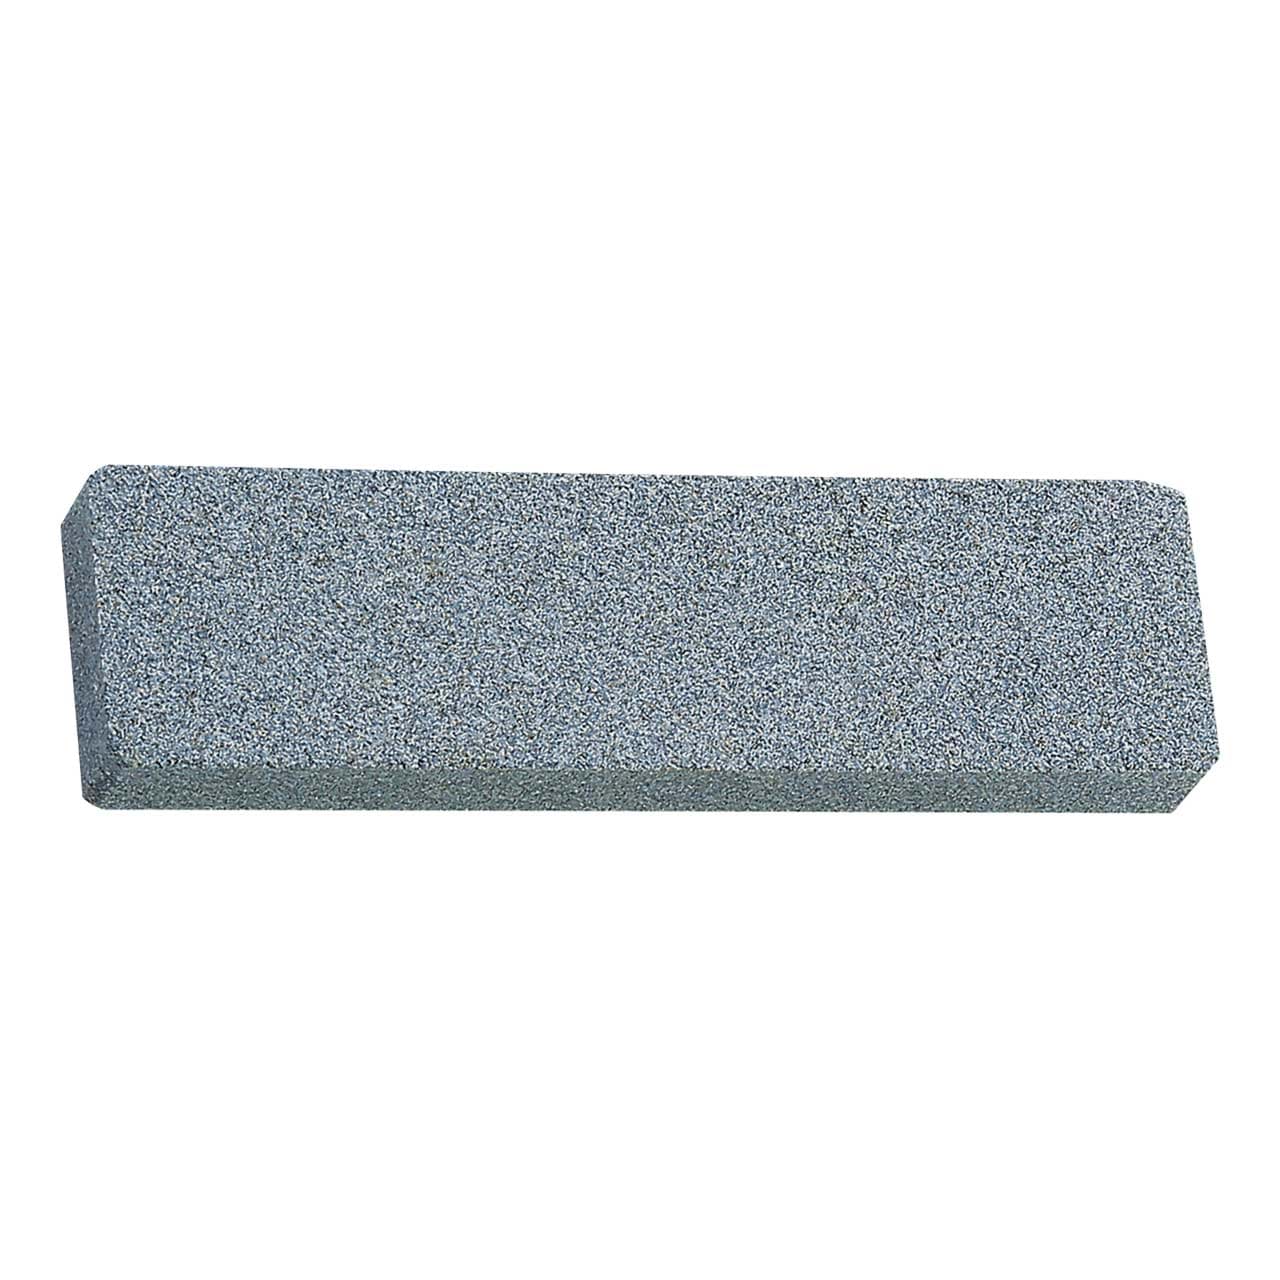 Picture of Herbertz - Honing Stone Compact